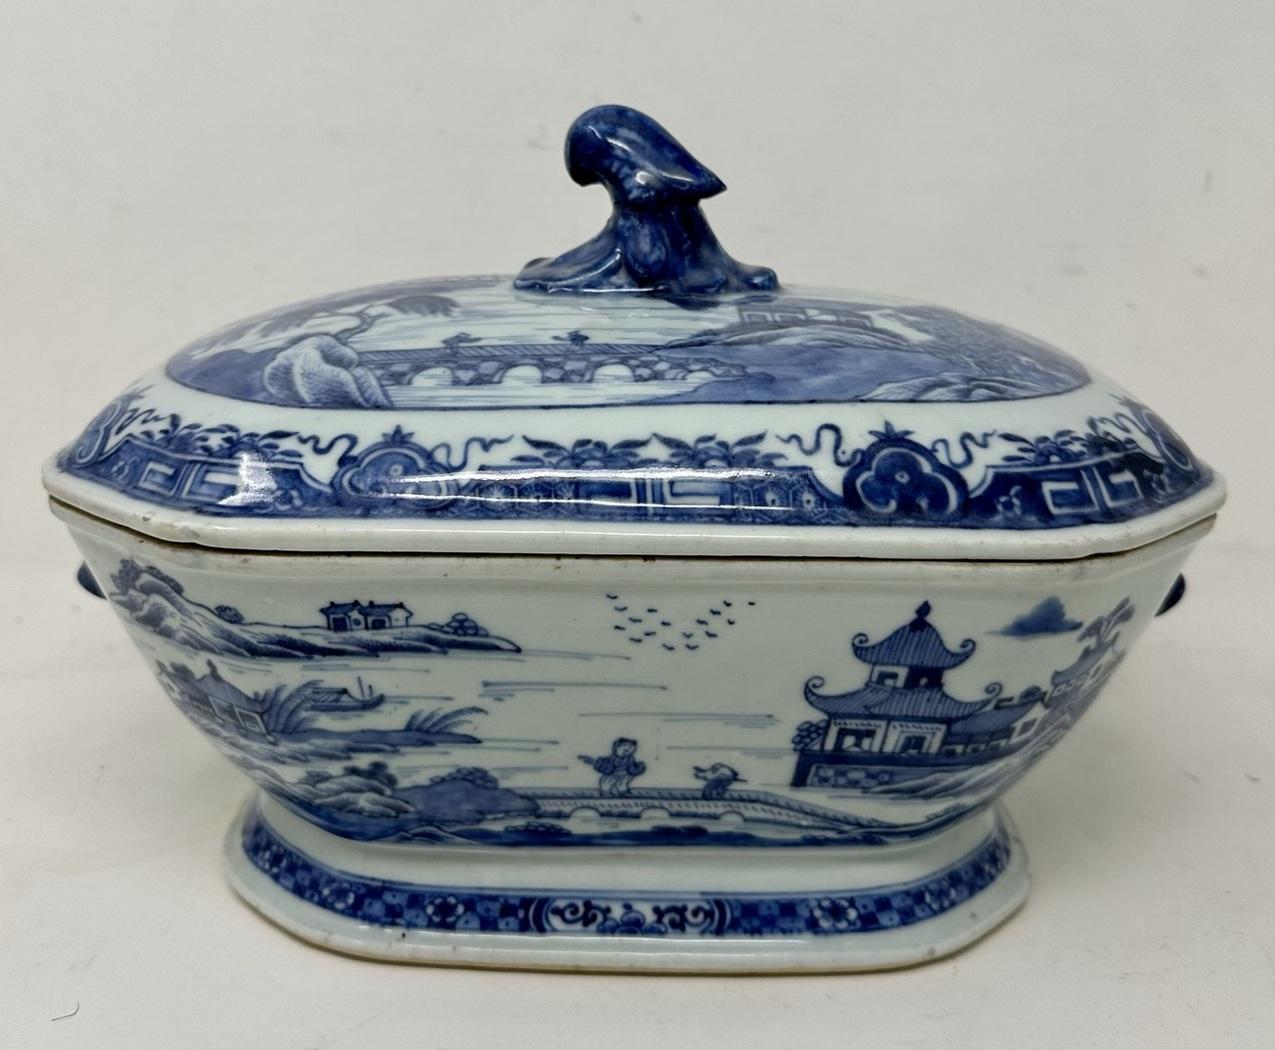 A Very Fine & Rare Example of an Eighteenth-Century Chinese Porcelain Export Oval Lidded twin handle blue and white Deep Dish or Soup Tureen of generous proportions and of the period Chien Lung 1736-1795. 

Exquisitely hand decorated depicting